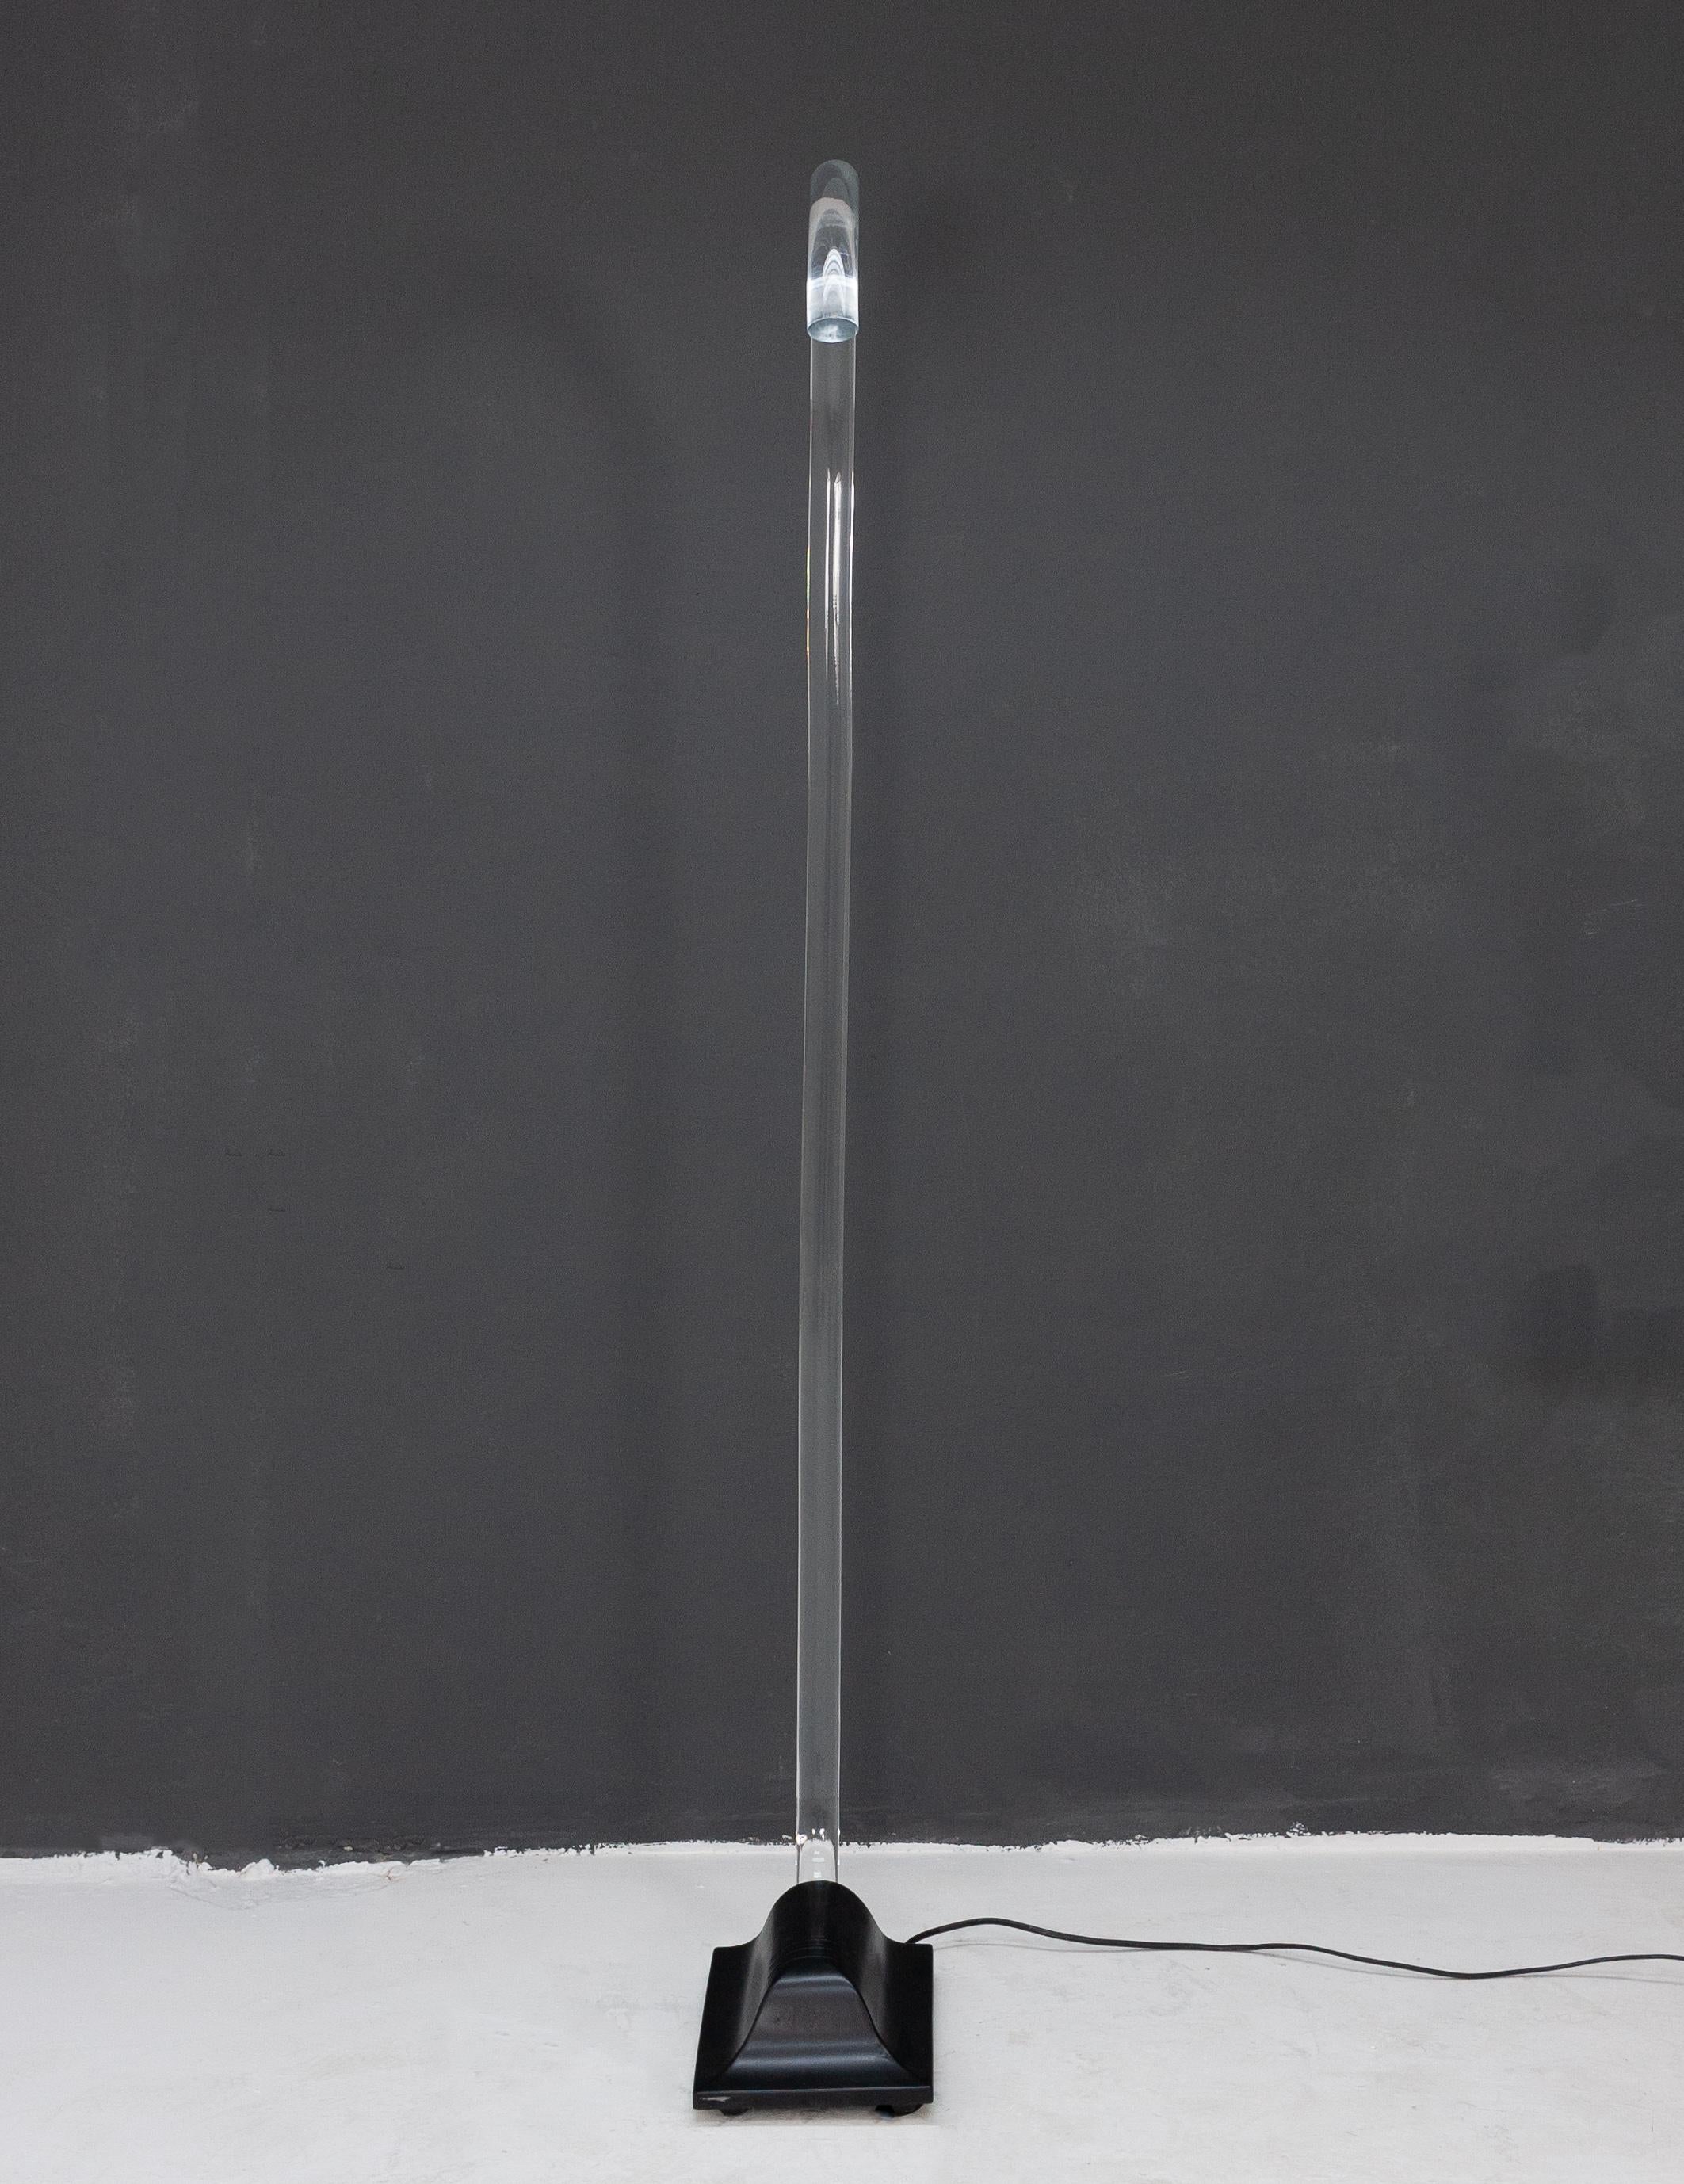 Perspex halogen floor lamp with ceramic base model King, designed in 1984 by Edy ten Berge Light & Design. A halogen light in the lamp base illuminates the curved perspex rod. This is an early example hand-signed on the base of the rod. Comes with